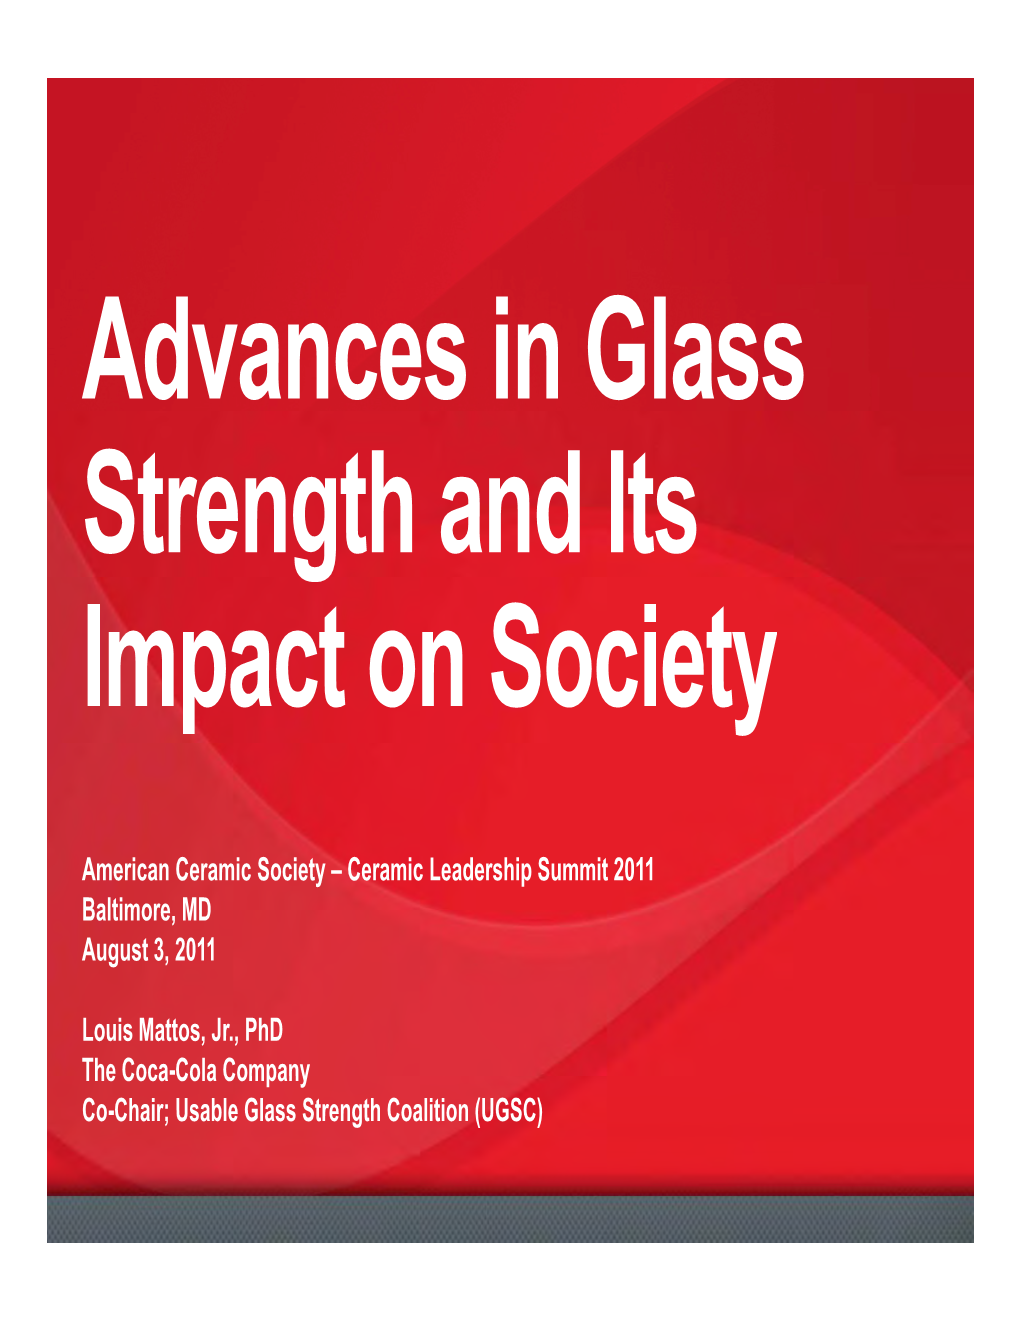 Why Glass Strength? Why Now? • Advanced Research Techniques Allow Us to Understand the True Nature of Flaw Generation, Flaw Growth and Glass Failure